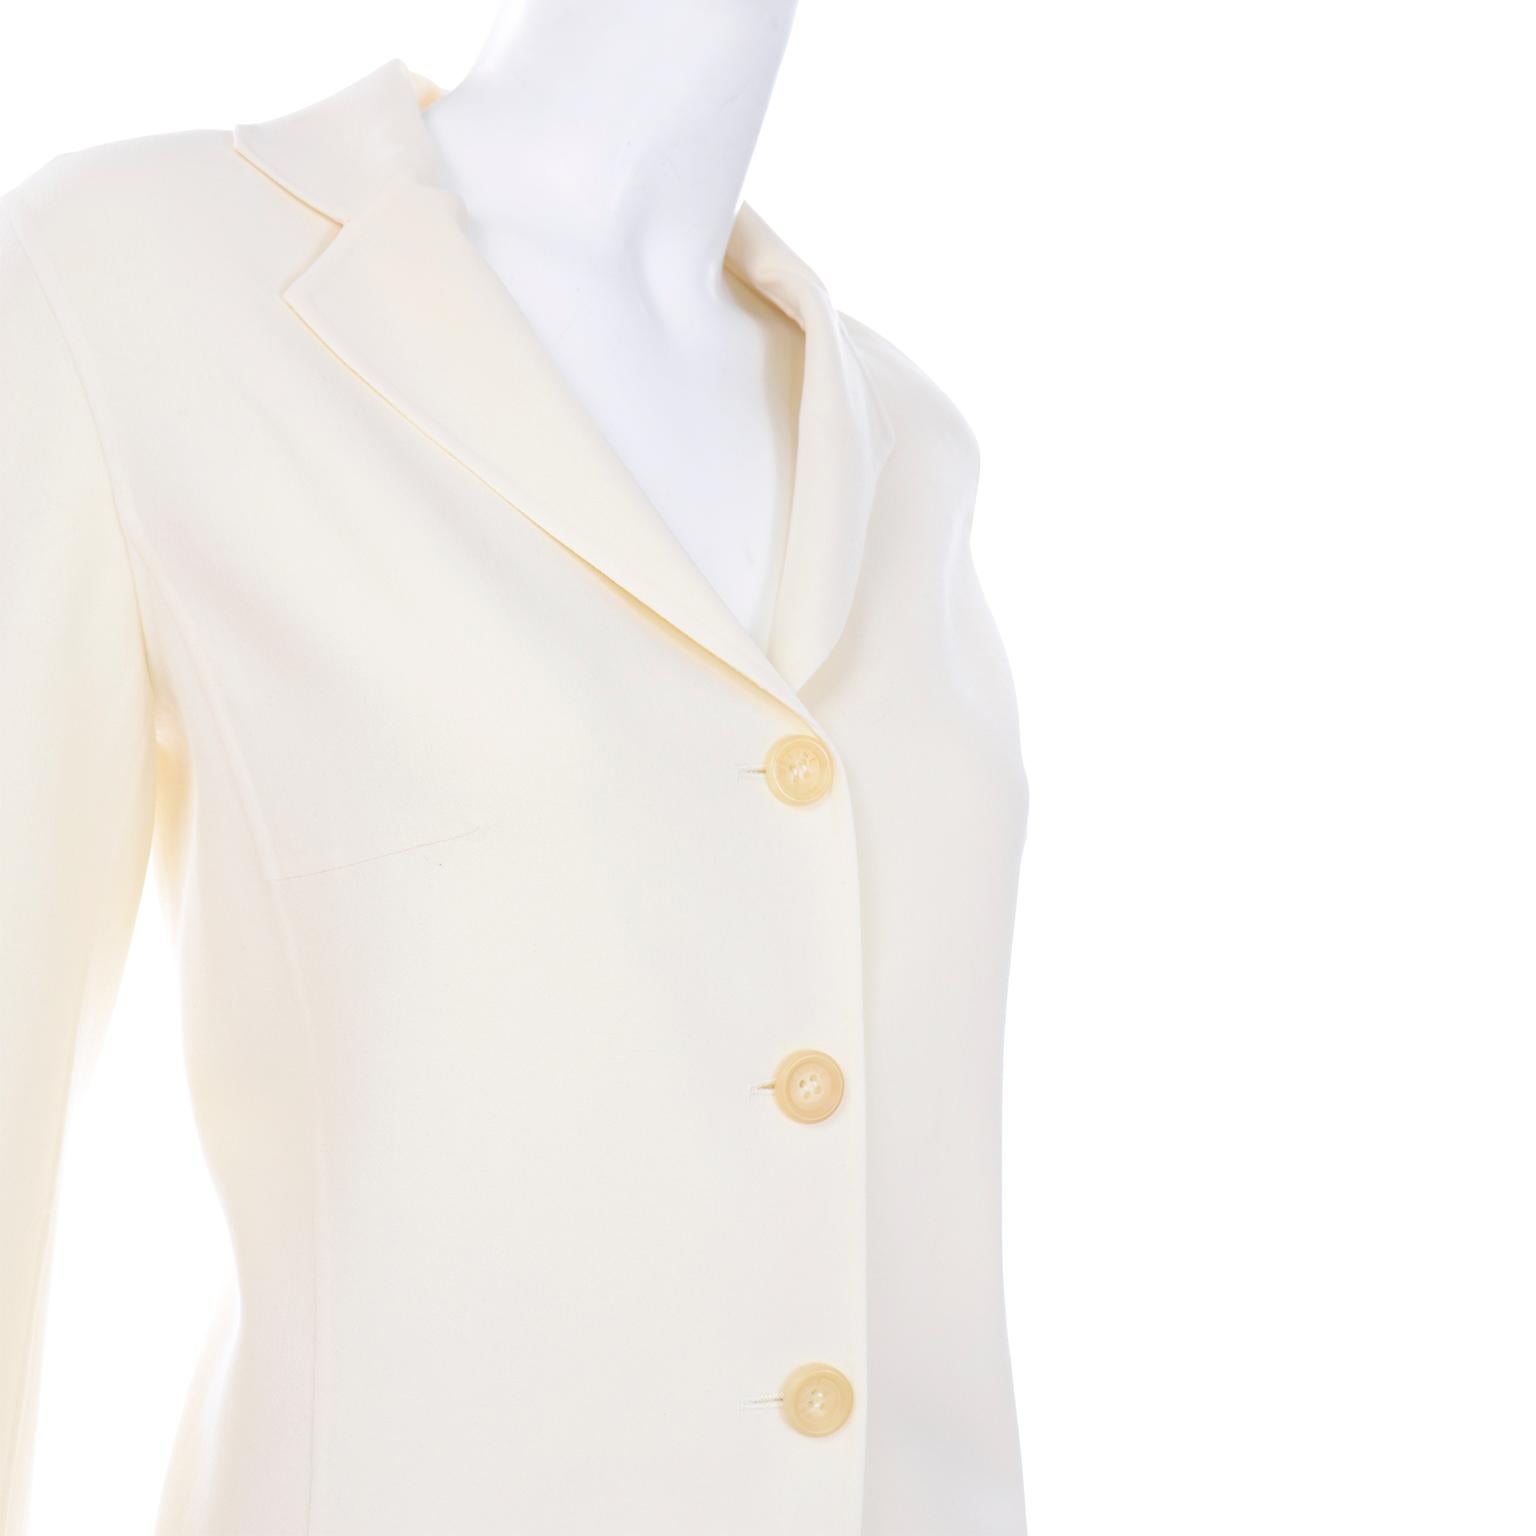 This is a really lovely creamy ivory Celine skirt and jacket suit with pretty seam details. We love this suit because the fabric  is super soft and lightweight, so it's a great option for warmer climates! You can wear the pieces as separates with